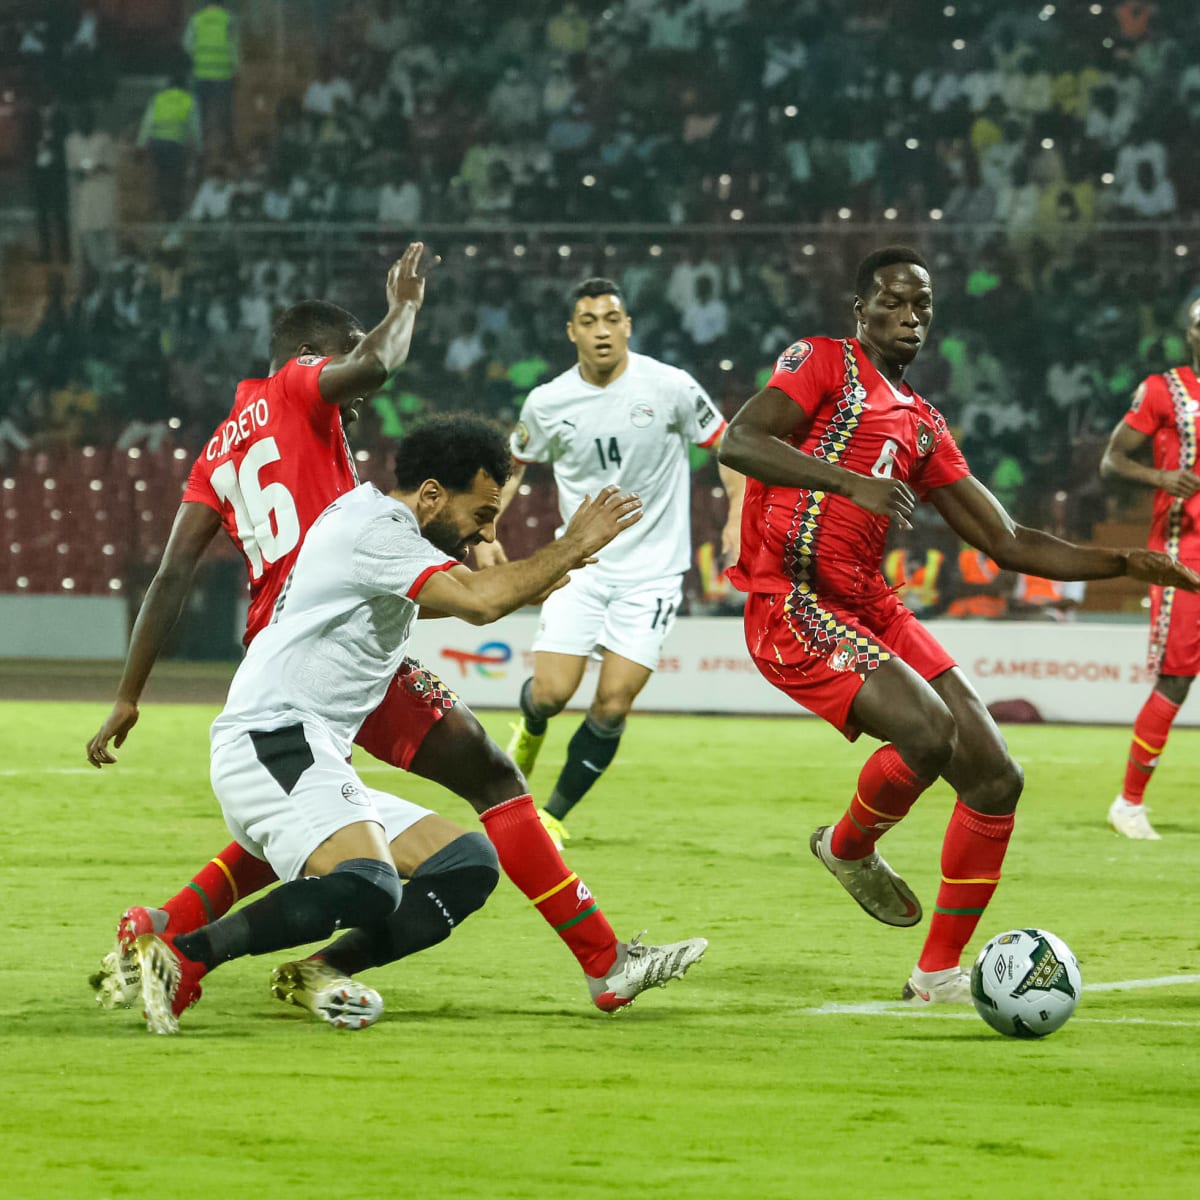 Africa Cup of Nations Egypt vs Sudan Live Stream Watch Online, TV Channel, Start Time - How to Watch and Stream Major League and College Sports 